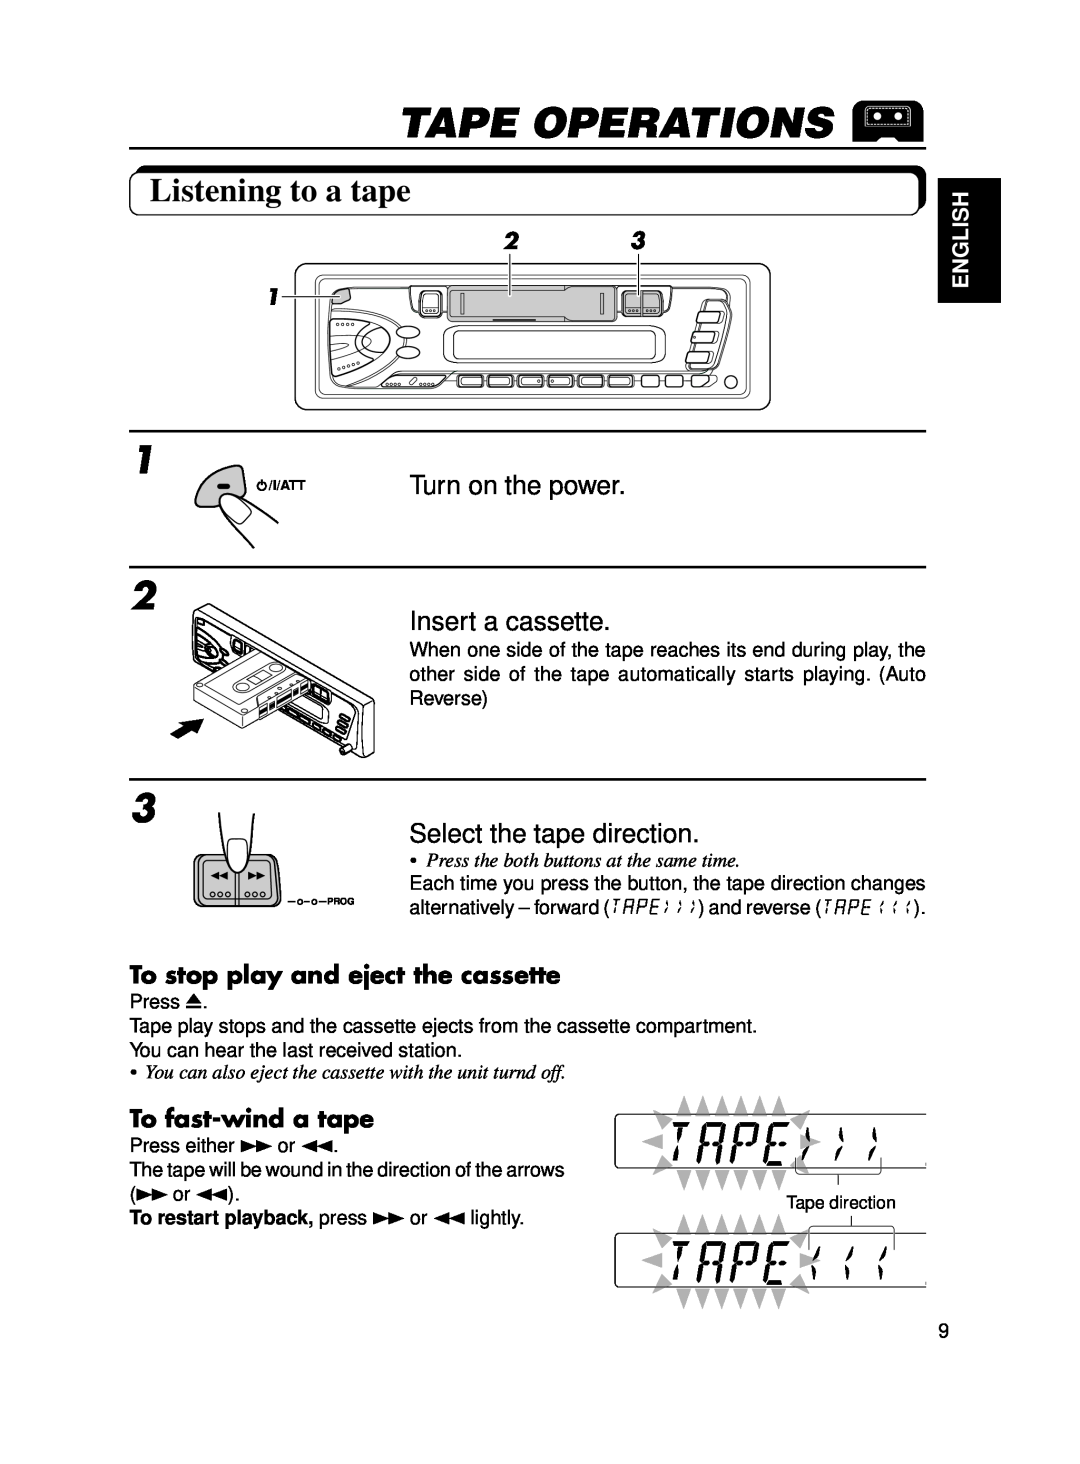 JVC KS-FX12 manual Tape Operations, Listening to a tape, Insert a cassette, Select the tape direction, To fast-wind a tape 